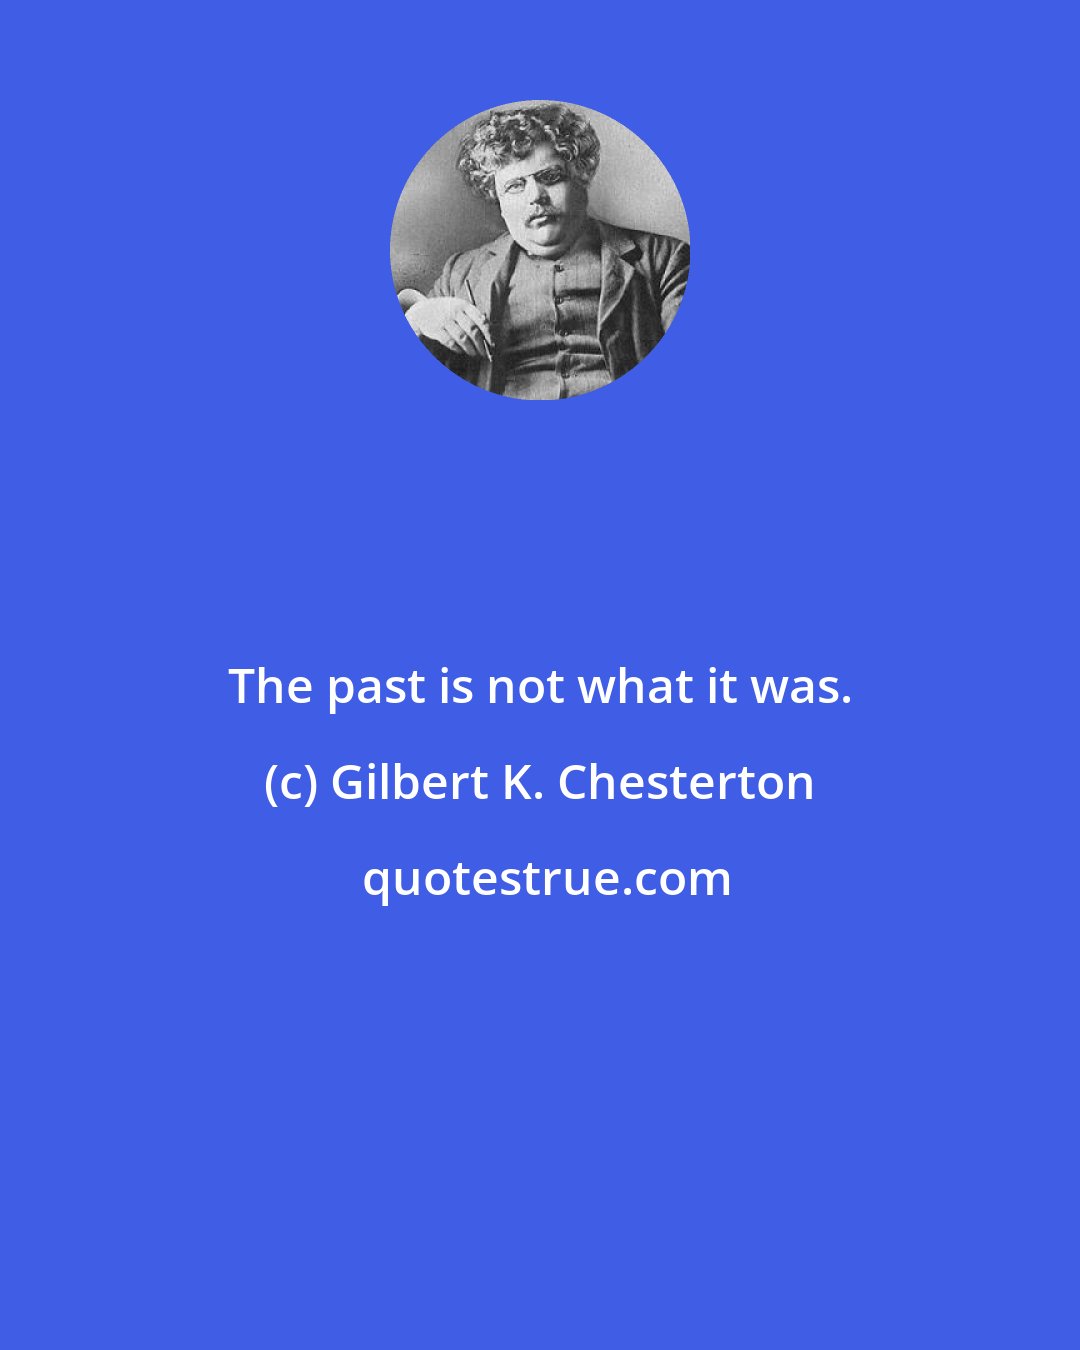 Gilbert K. Chesterton: The past is not what it was.